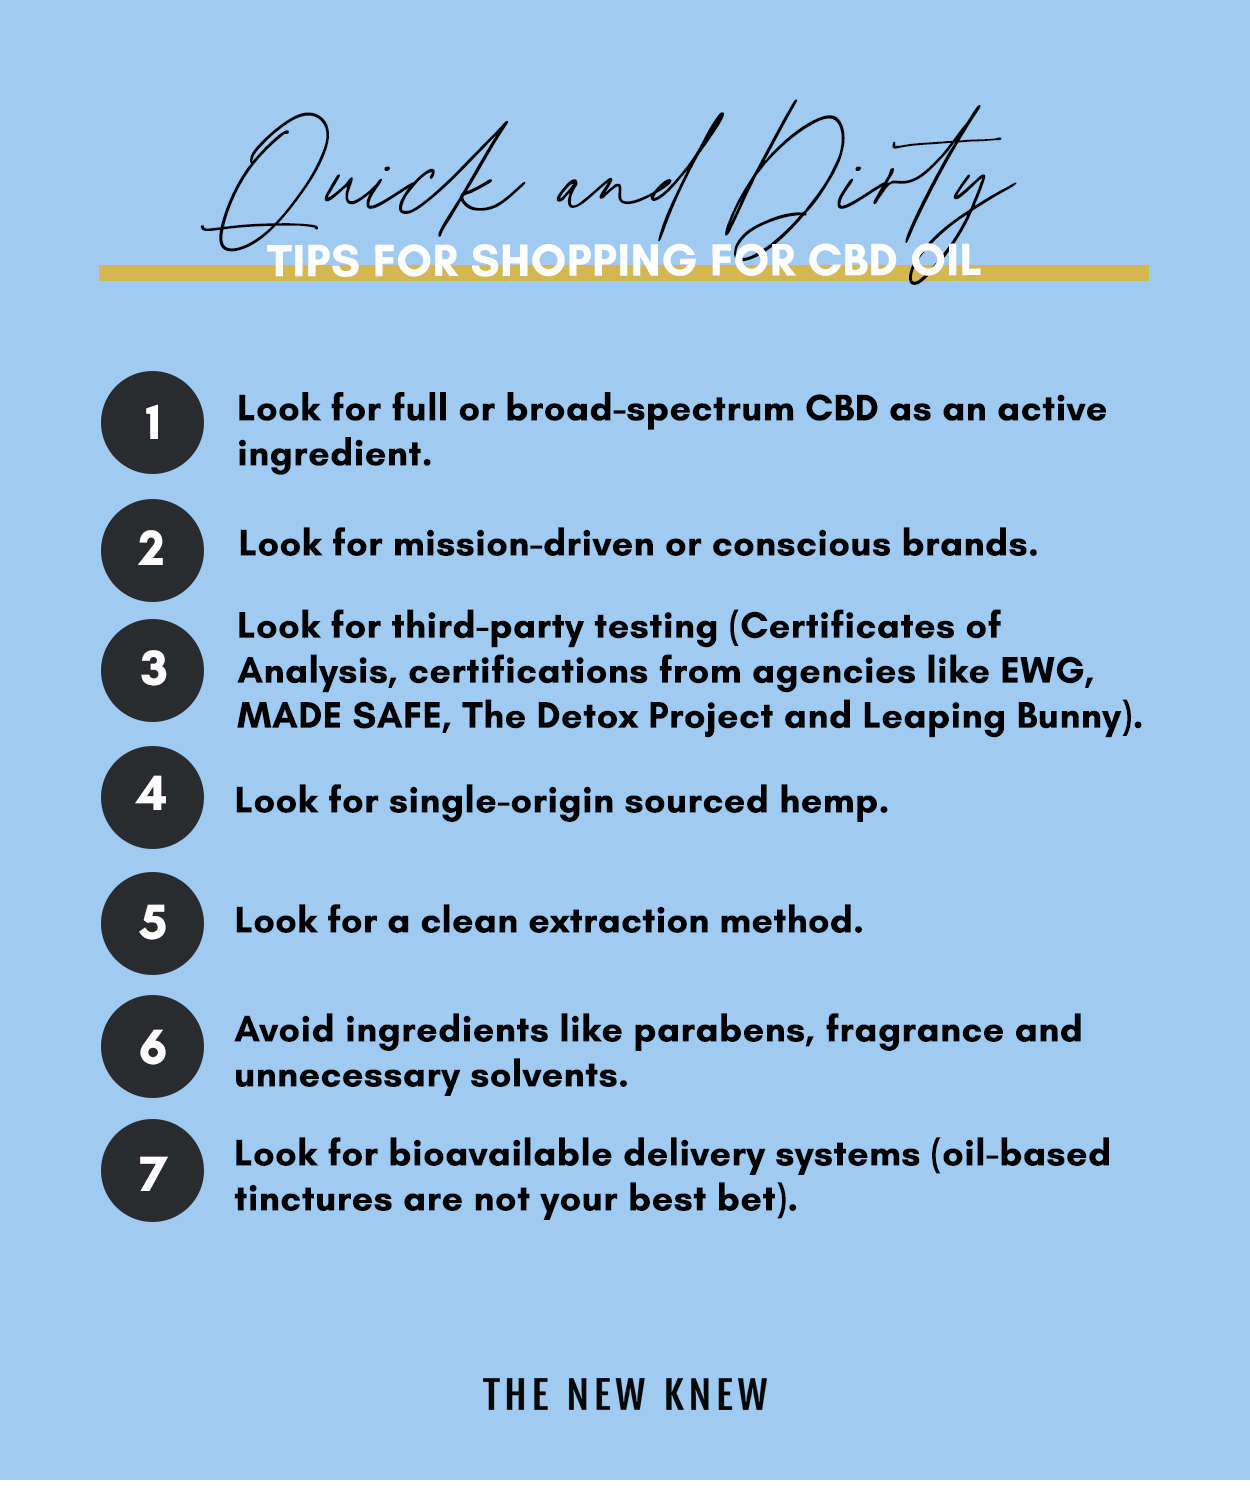 A list of tips for using CBD oil